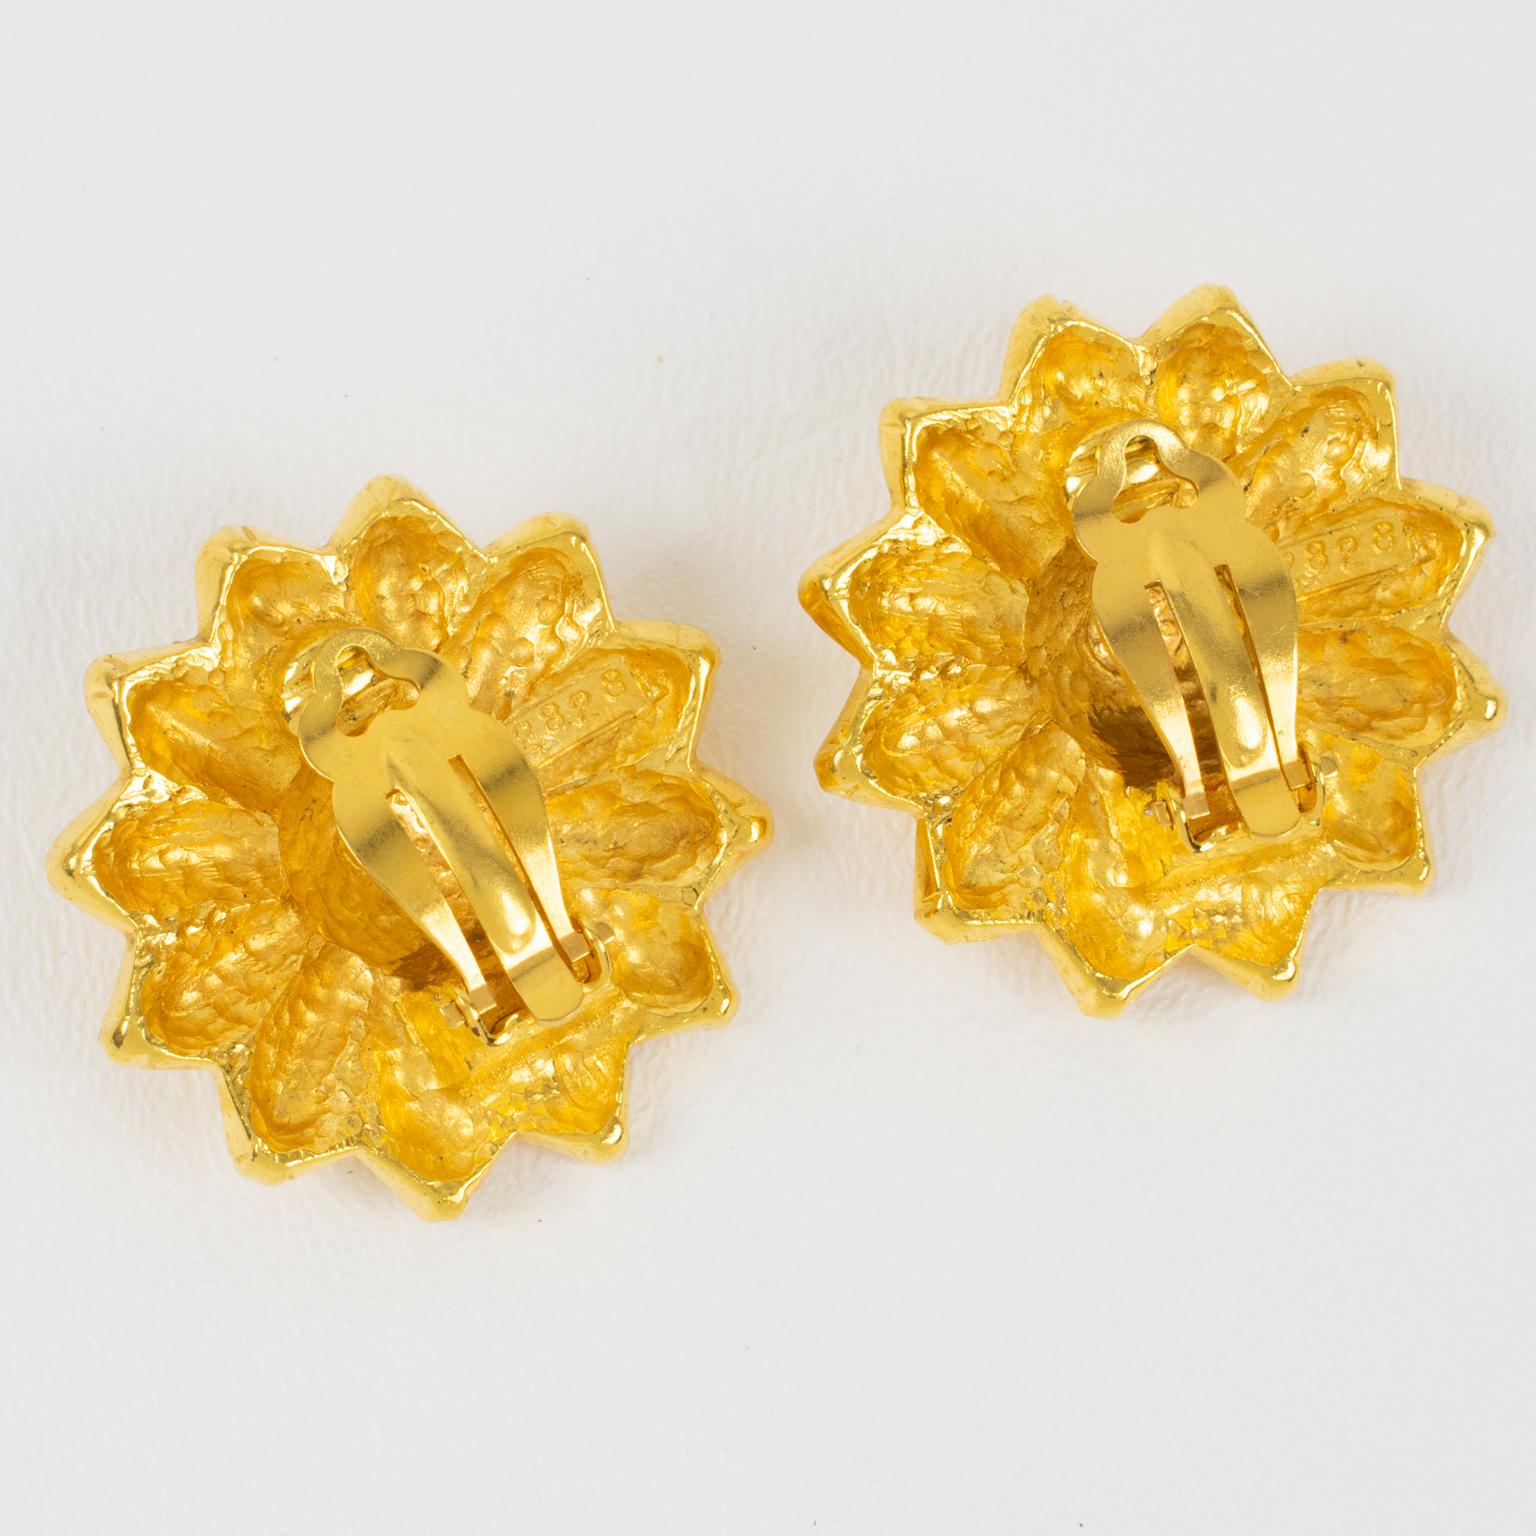 Carven Paris Gilt Metal Clip Earrings Carved Sun In Excellent Condition For Sale In Atlanta, GA